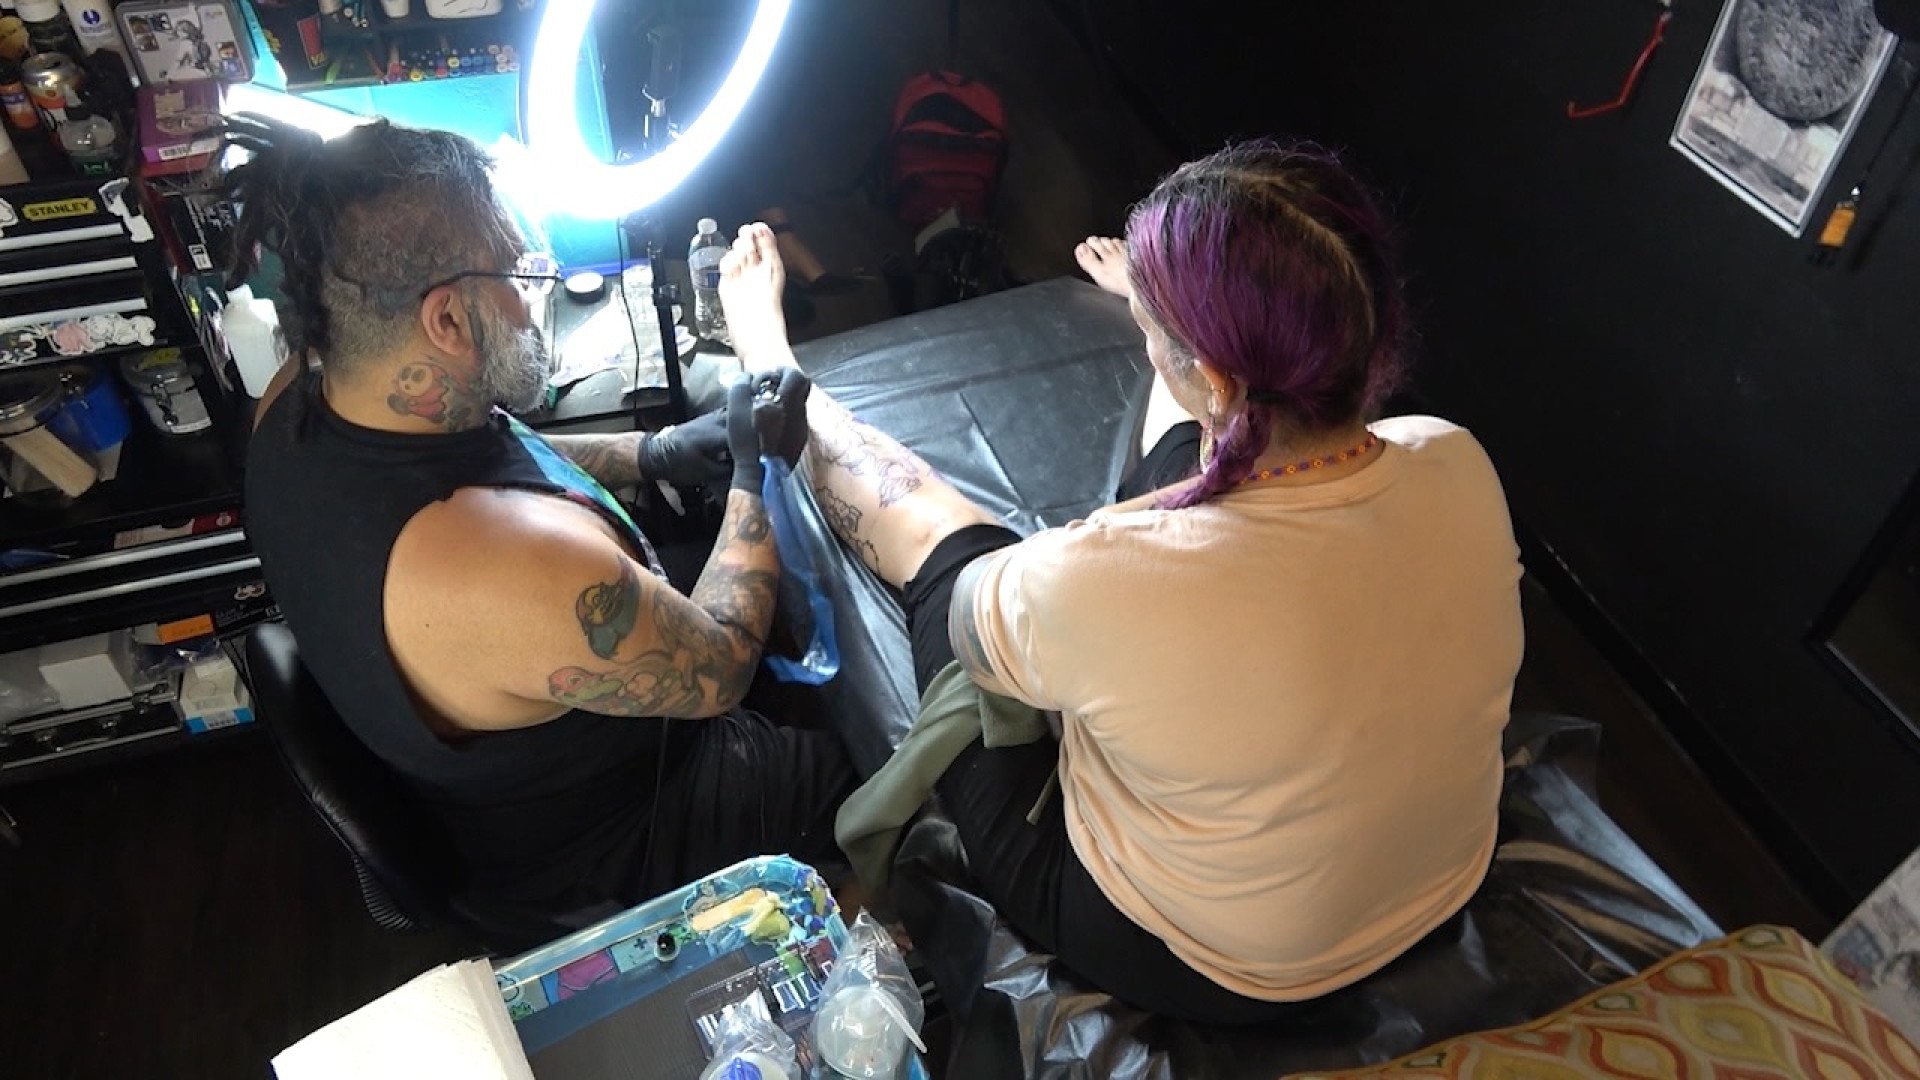 The Brutal Tattoo Ritual Built on Pain - VICE Video: Documentaries, Films,  News Videos